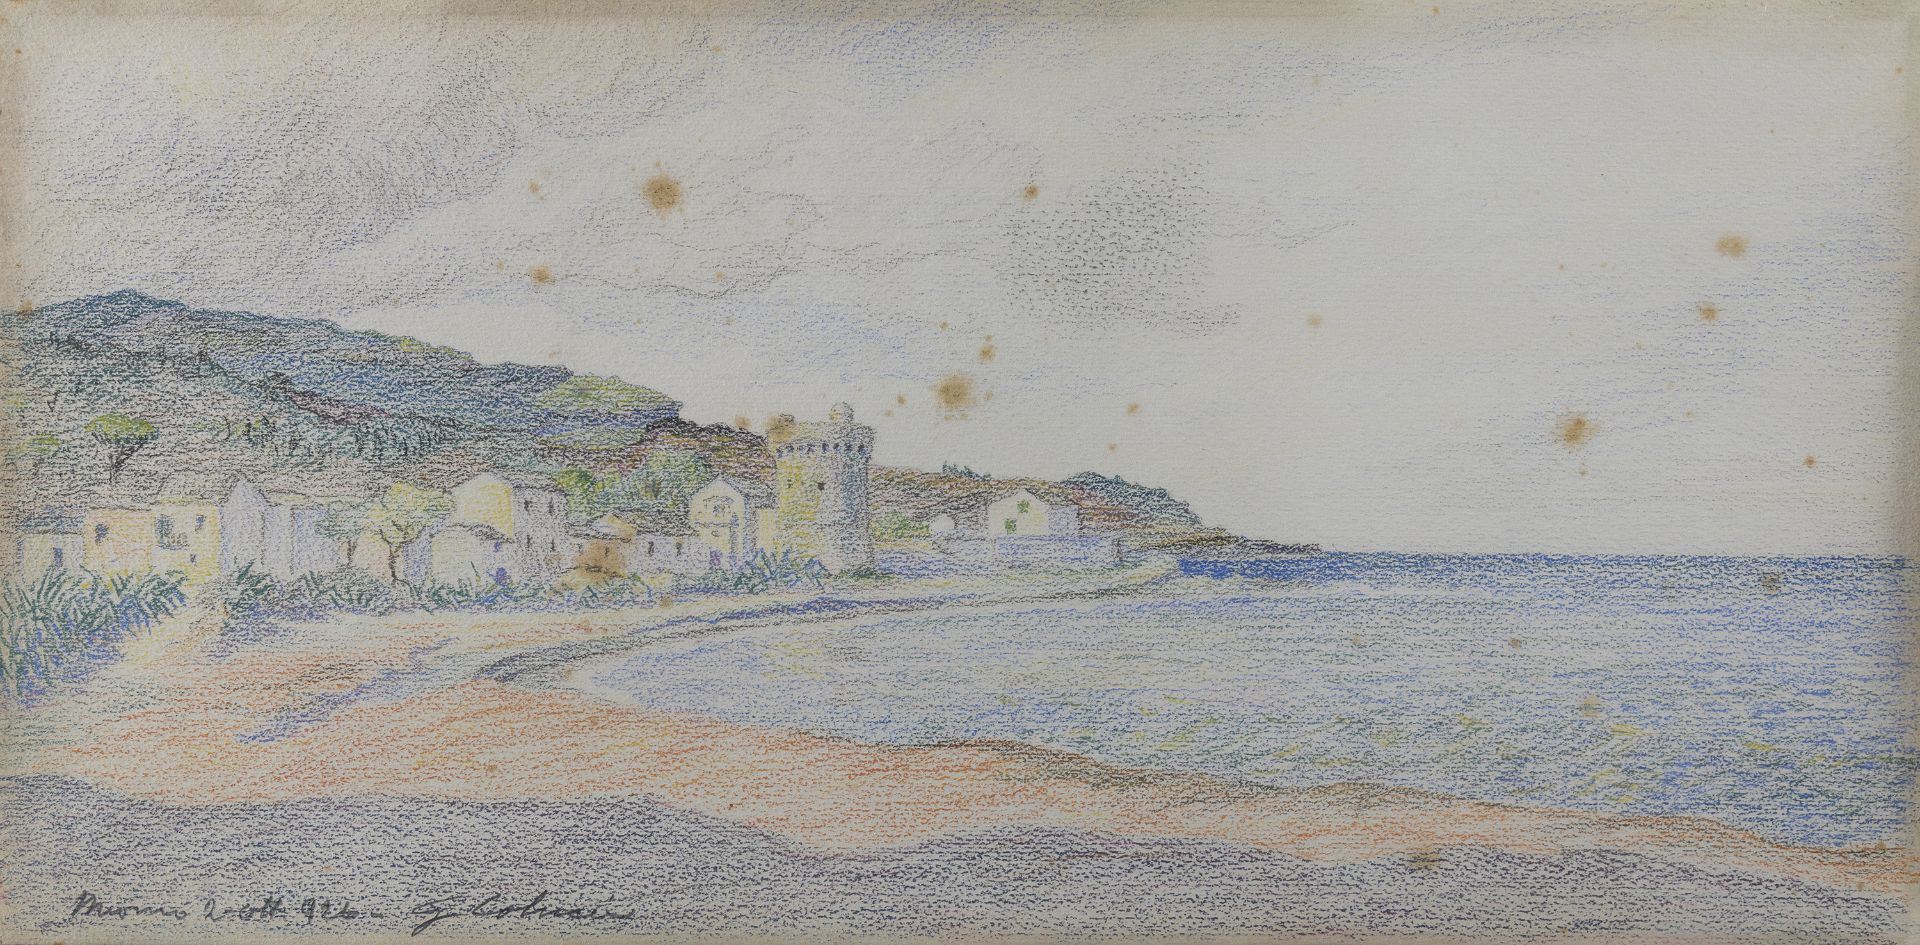 PASTEL AND PENCIL DRAWING BY GUIDO COLUCCI 1921